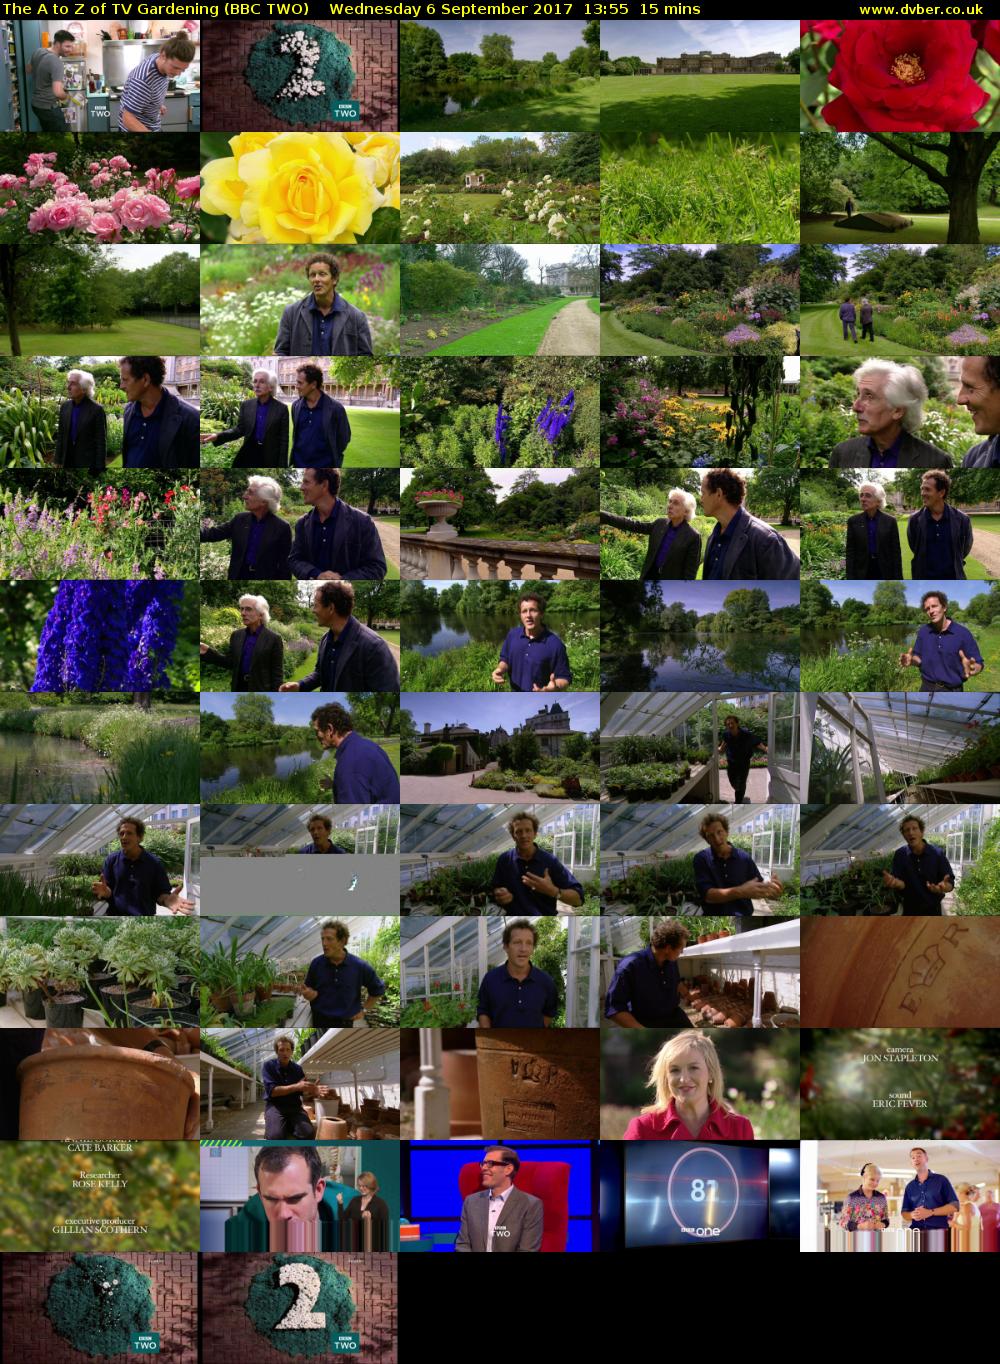 The A to Z of TV Gardening (BBC TWO) Wednesday 6 September 2017 13:55 - 14:10